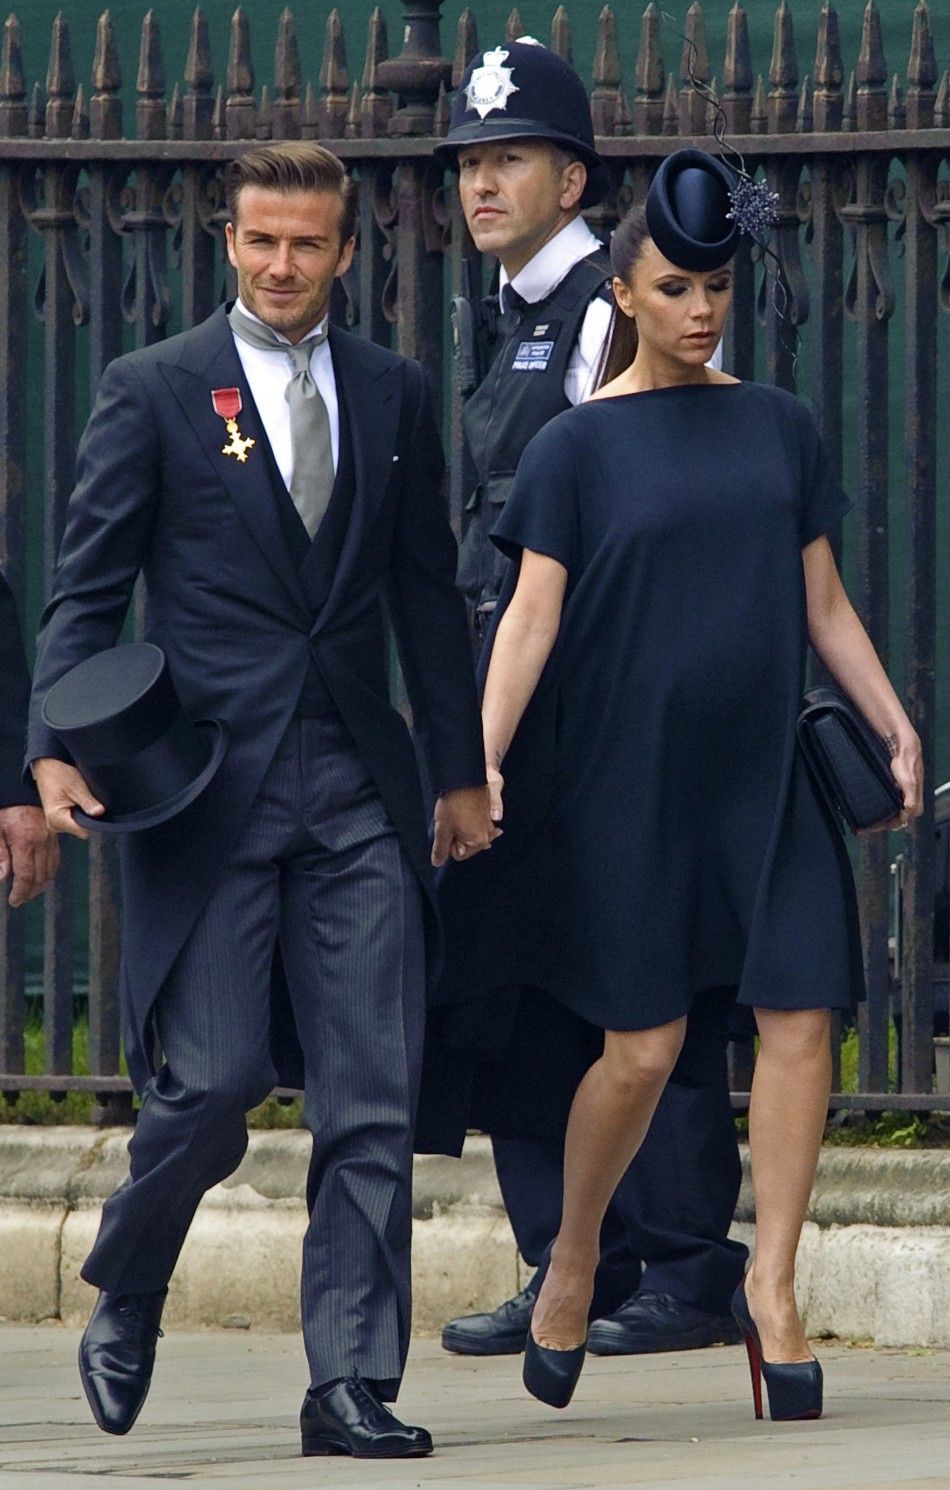 British soccer player David Beckham and his wife Victoria arrive at Westminster Abbey before the wedding of Britains Prince William and Kate Middleton, in central London